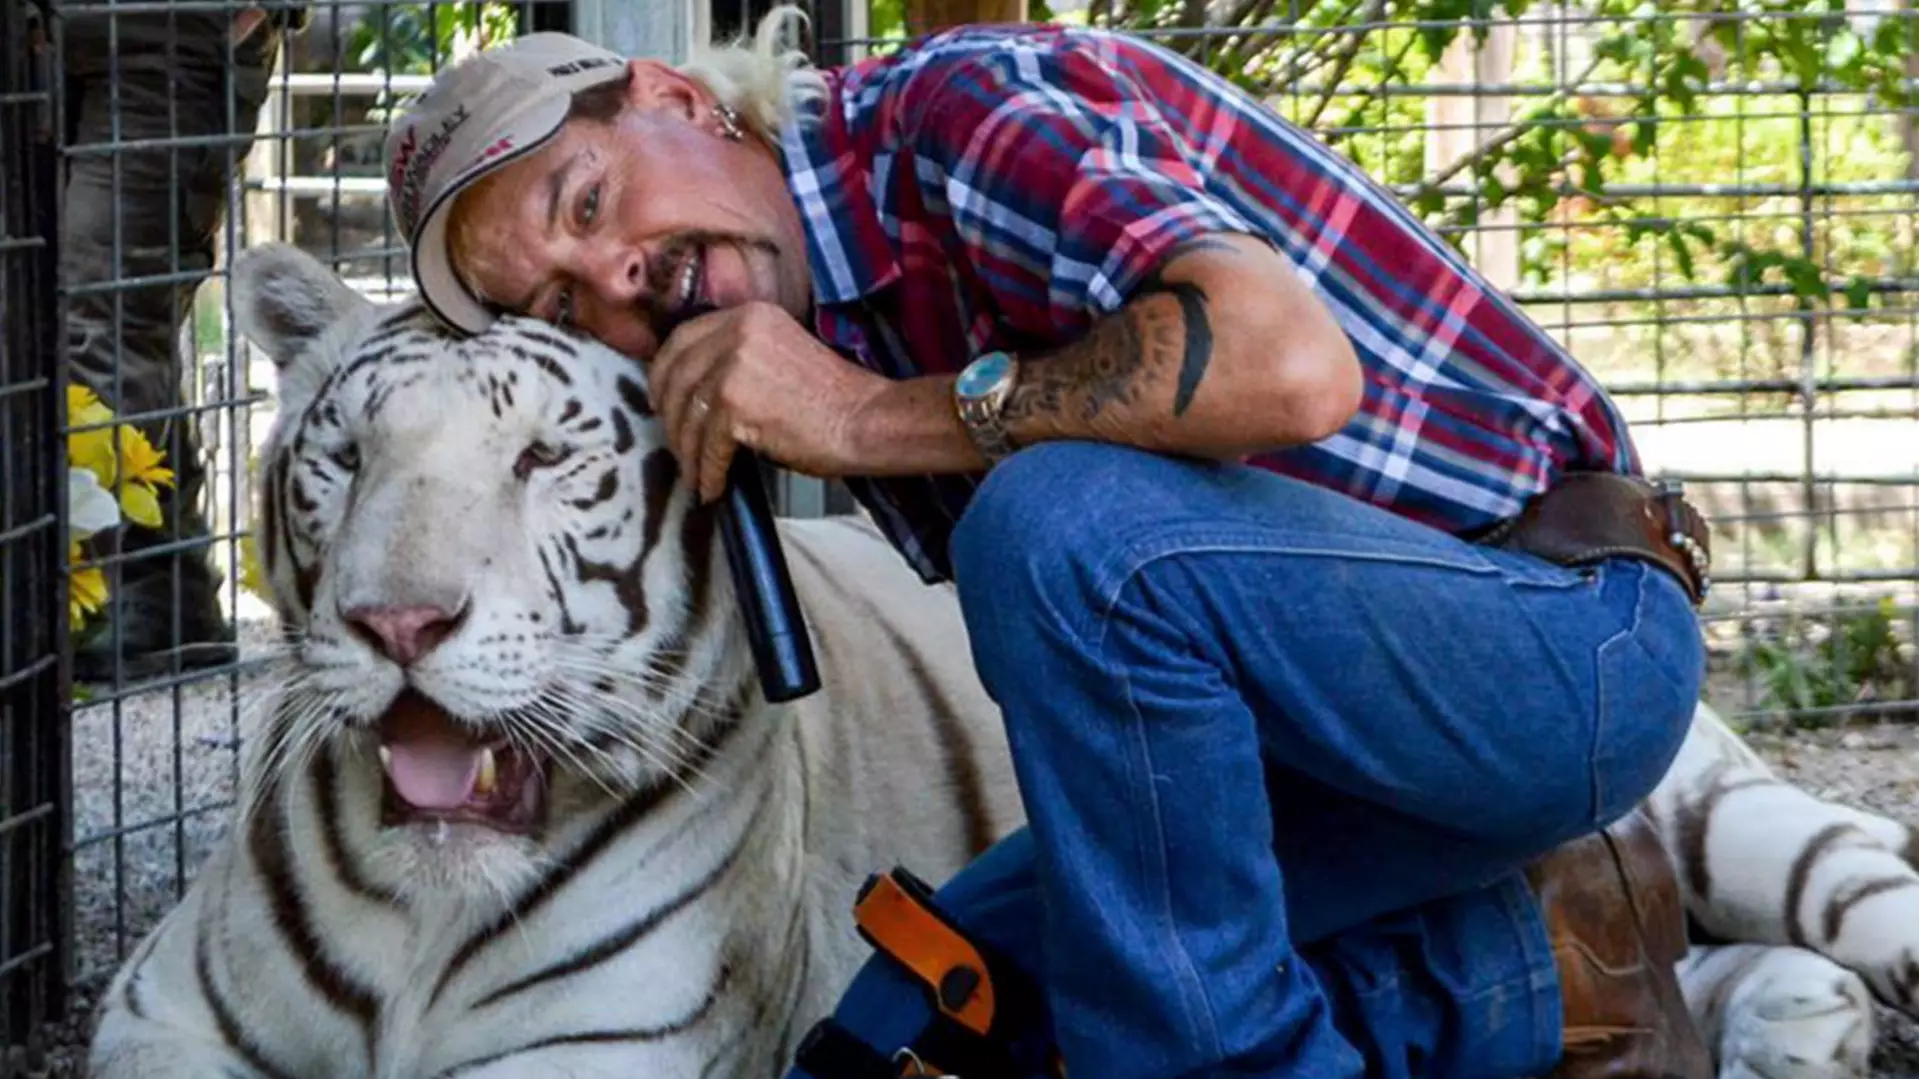 Joe Exotic is in jail for a murder for hire plot against Carole (